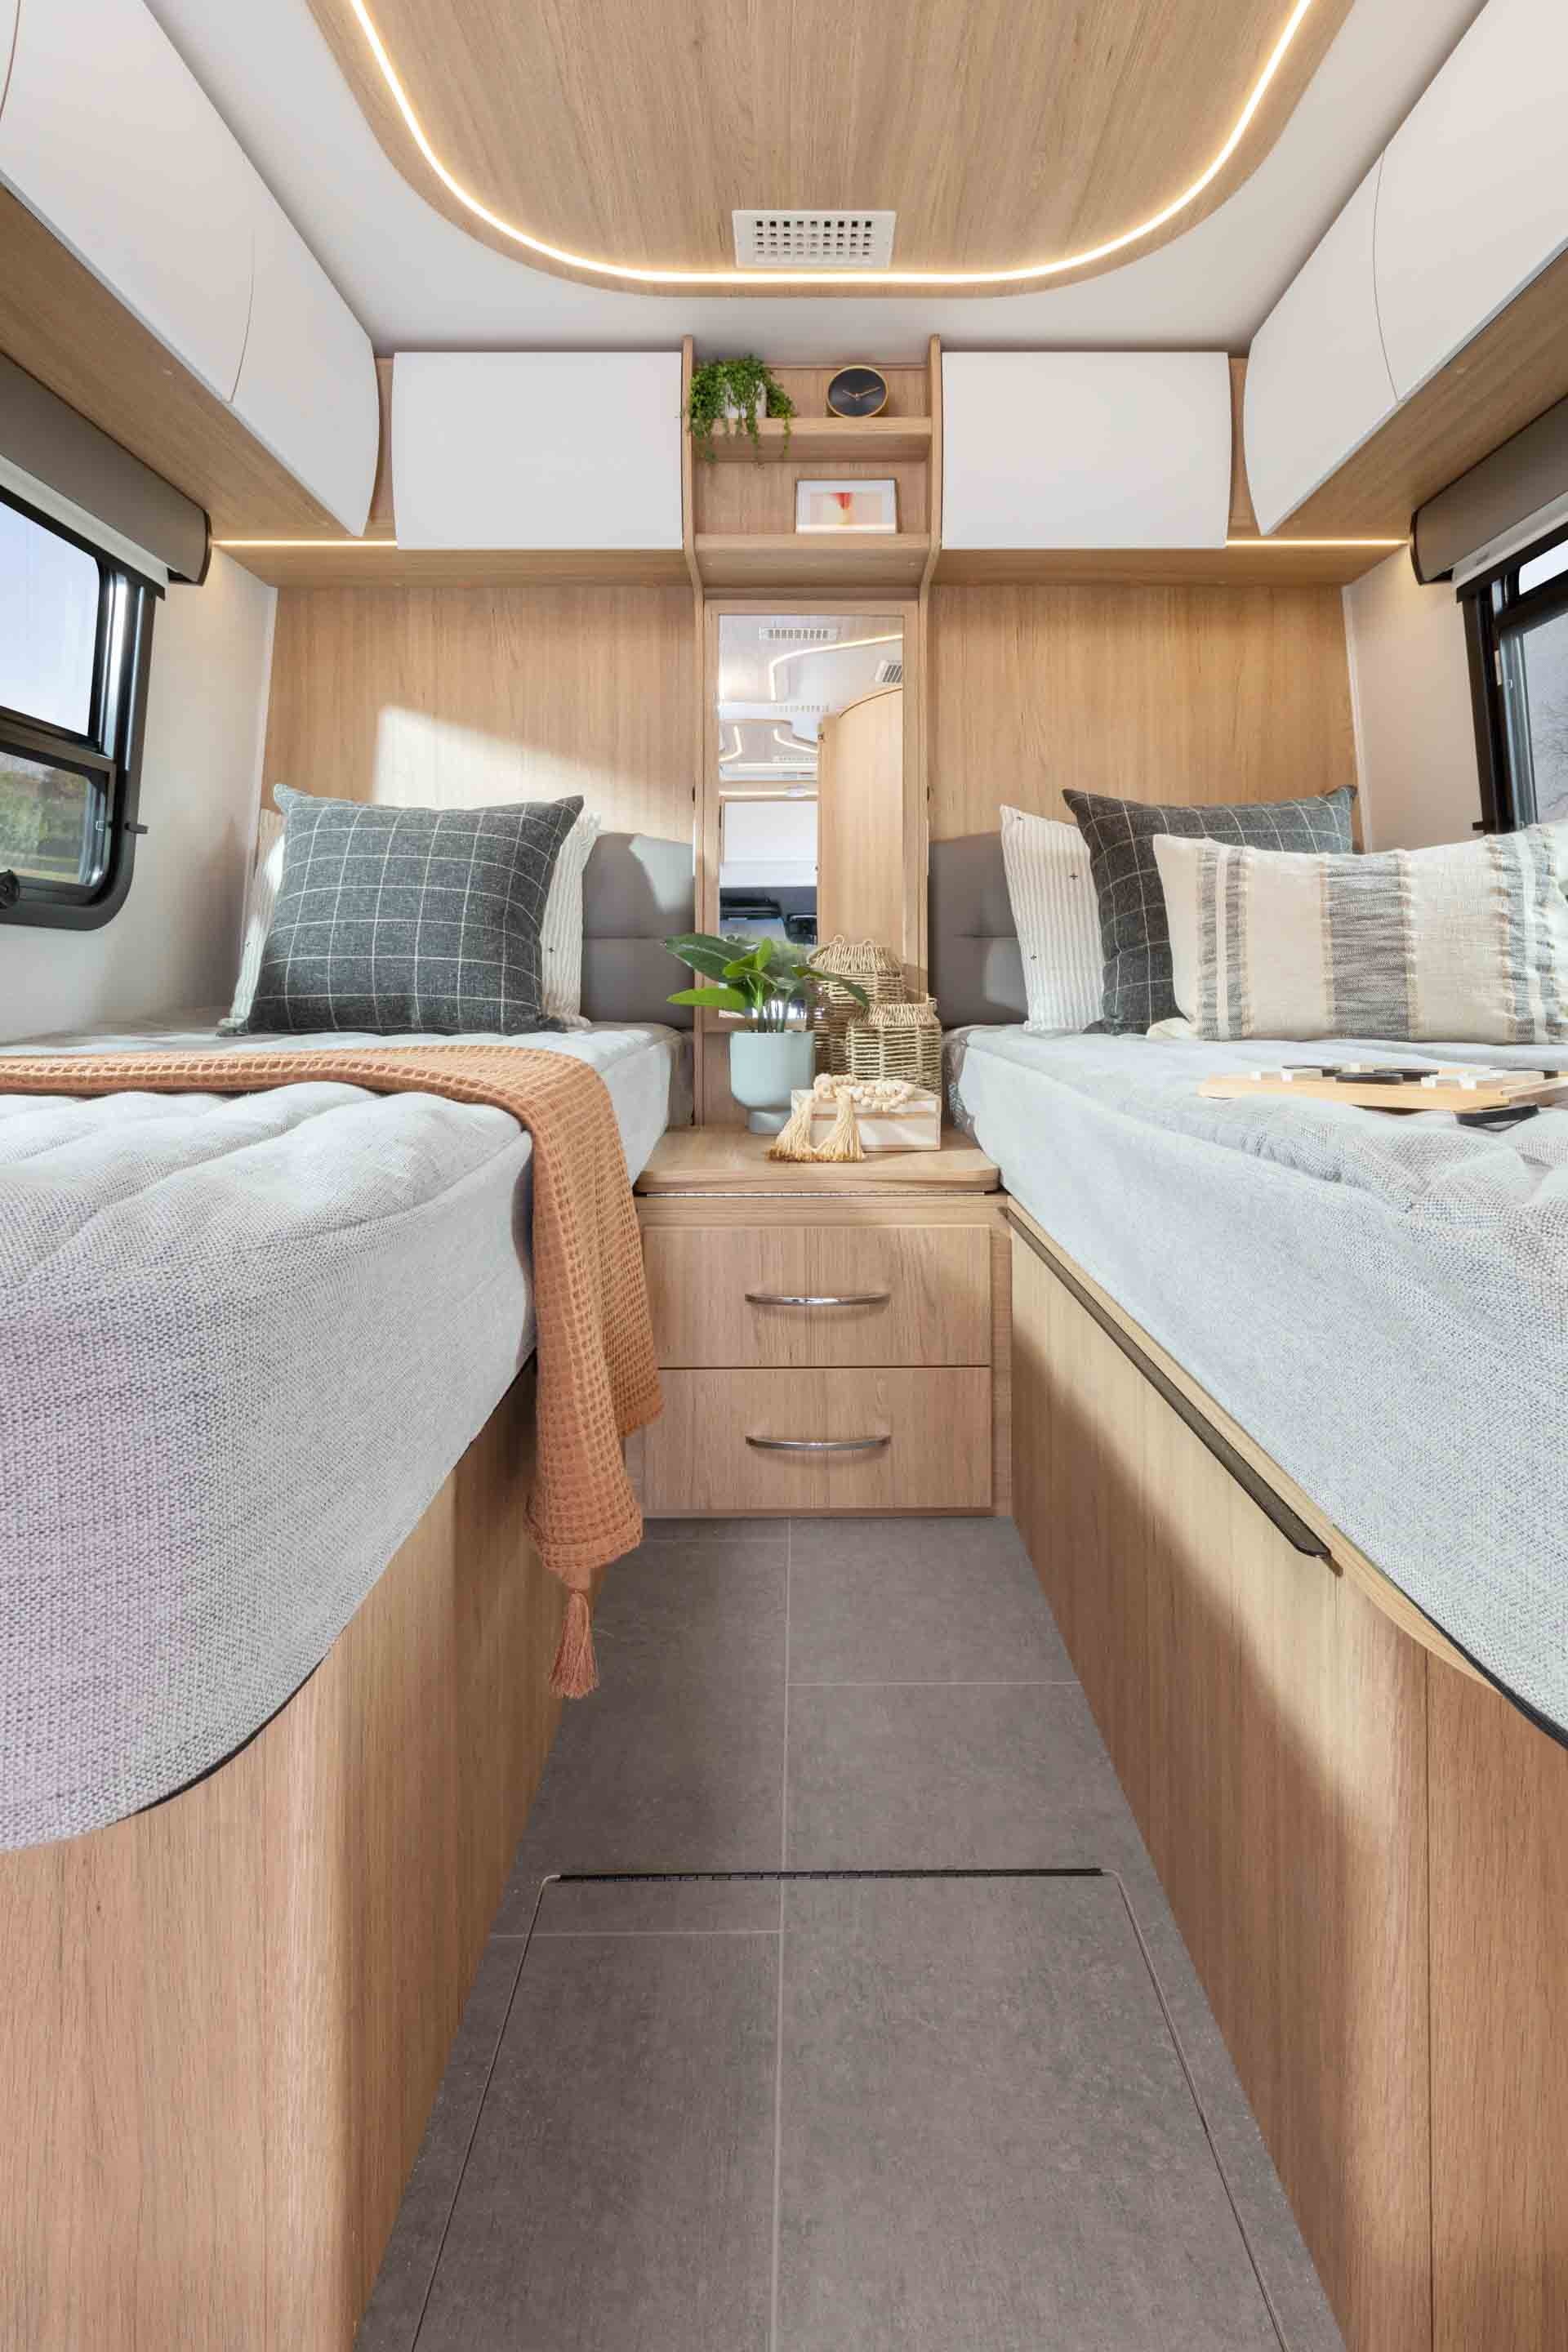 The 2023 Unity Twin Bed Is the Perfect Weekend Getaway RV, Has Two